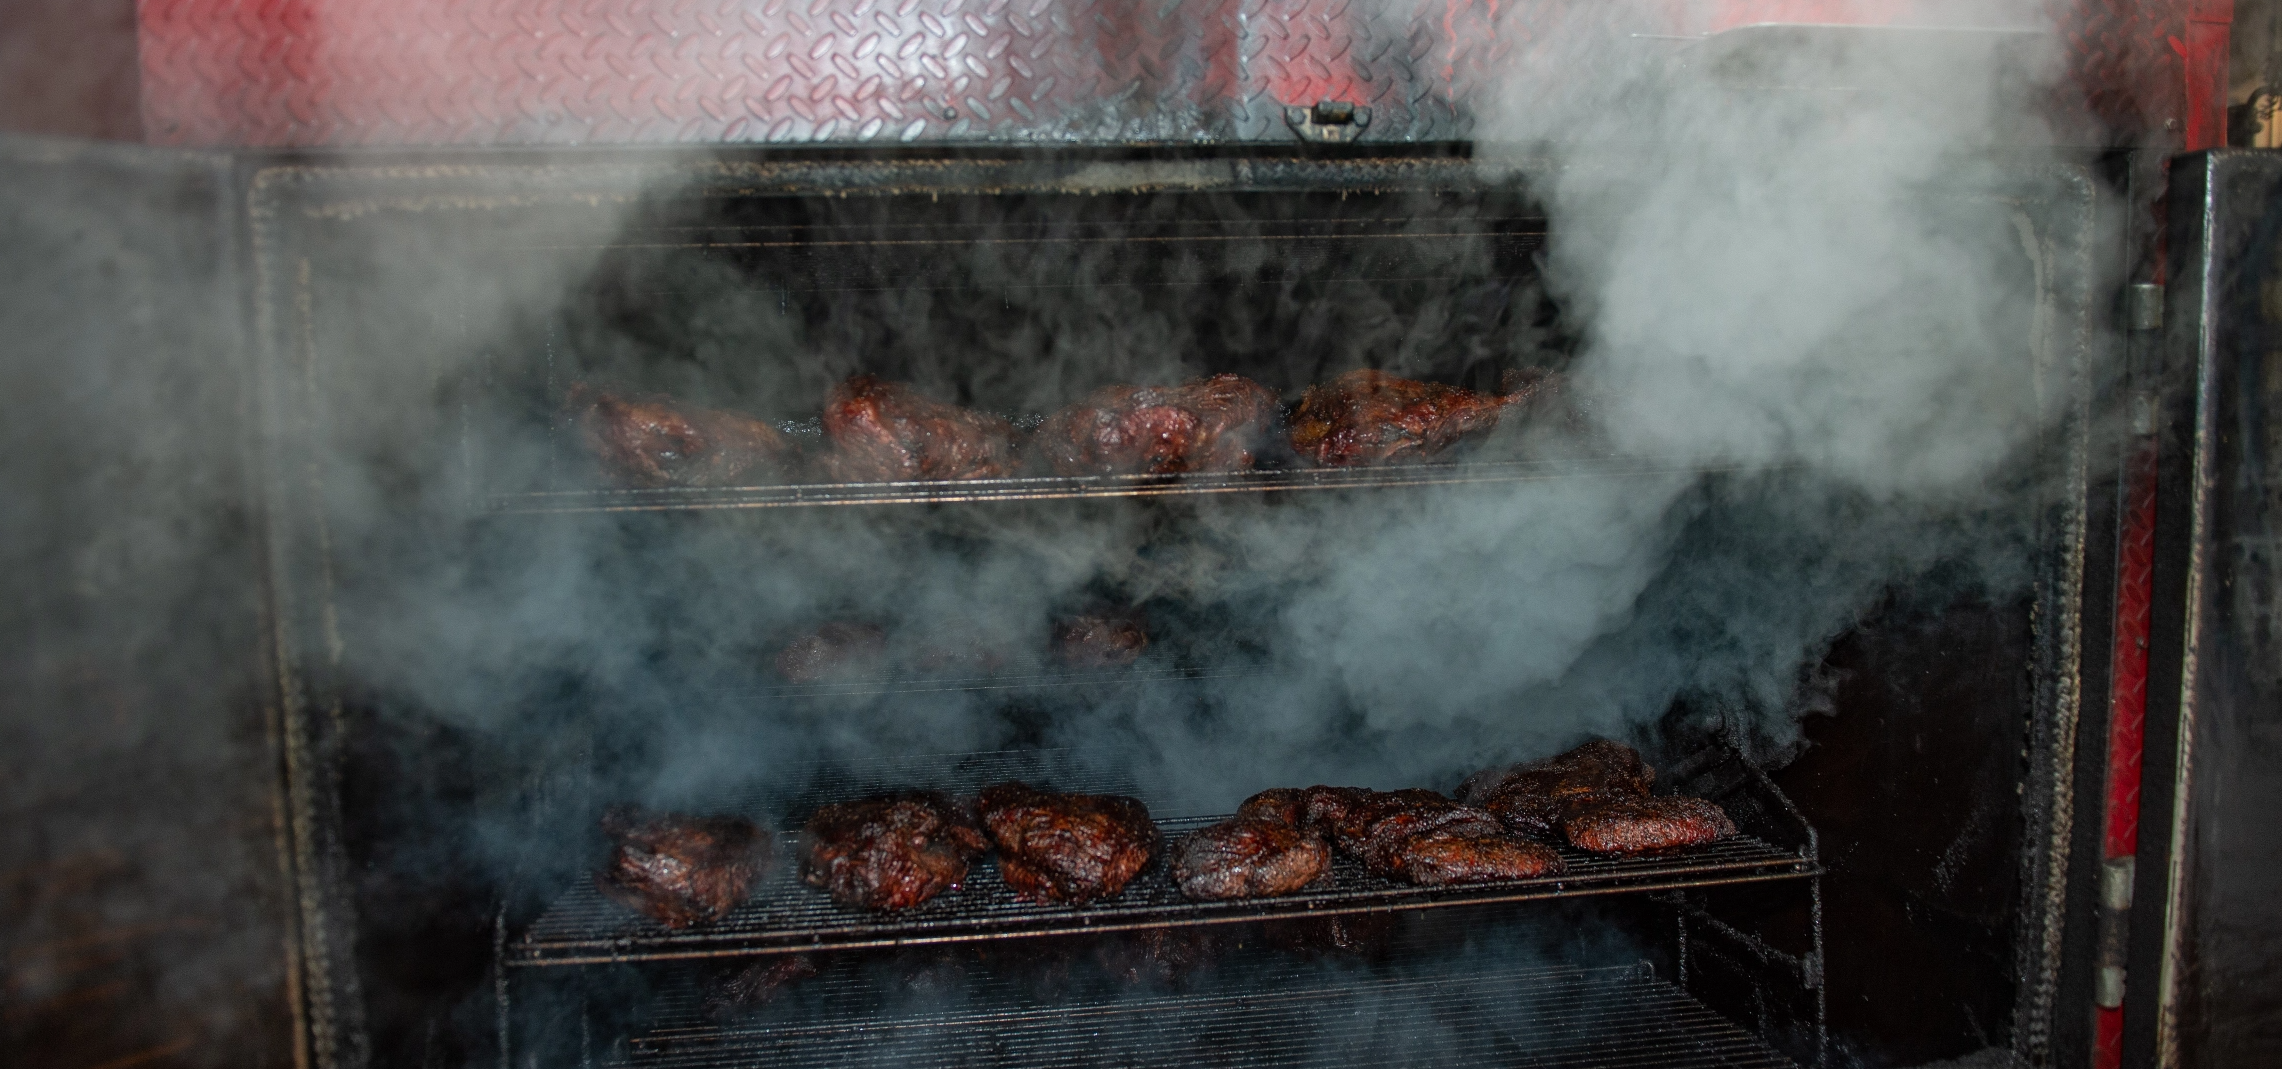 Smoke pouring out of a grill